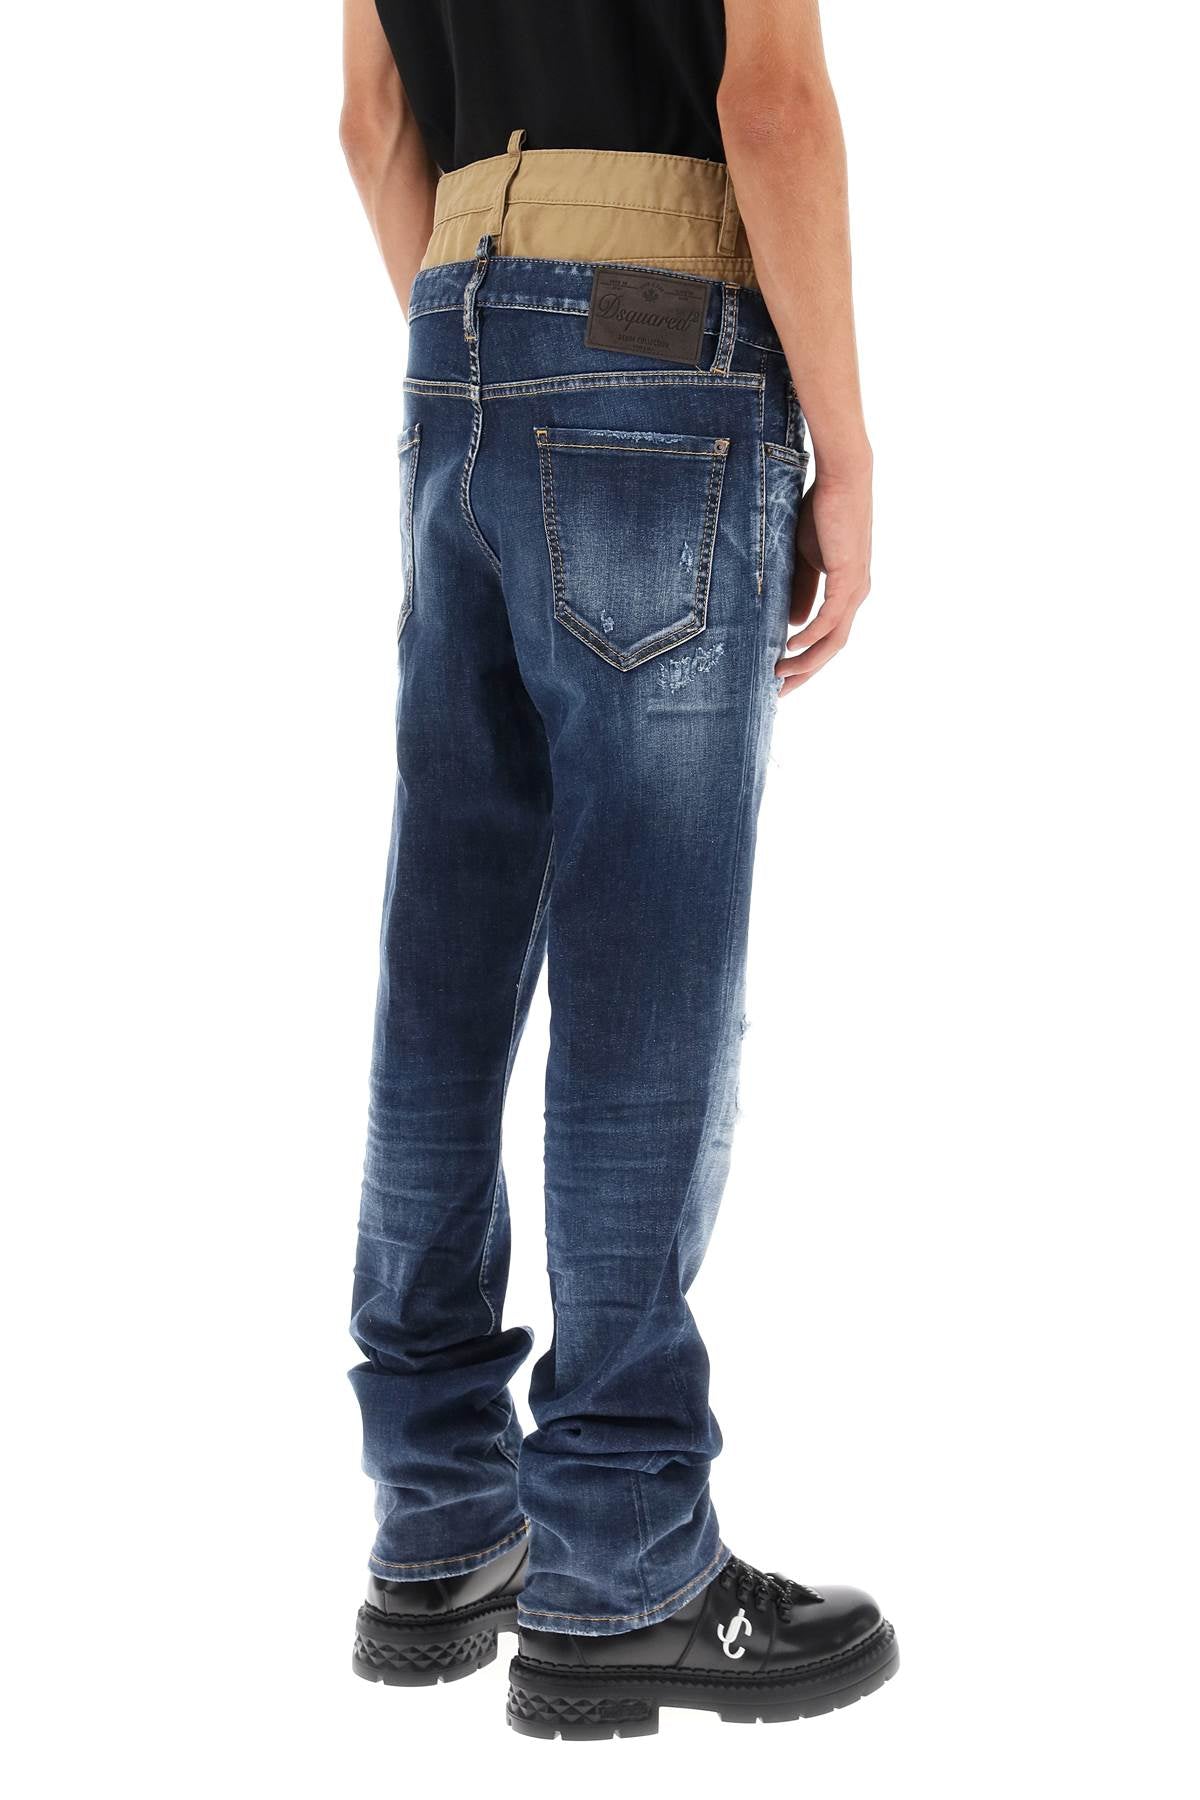 Shop Dsquared2 Medium Ripped Wash Skinny Twin Pack Jeans For Men In Blue